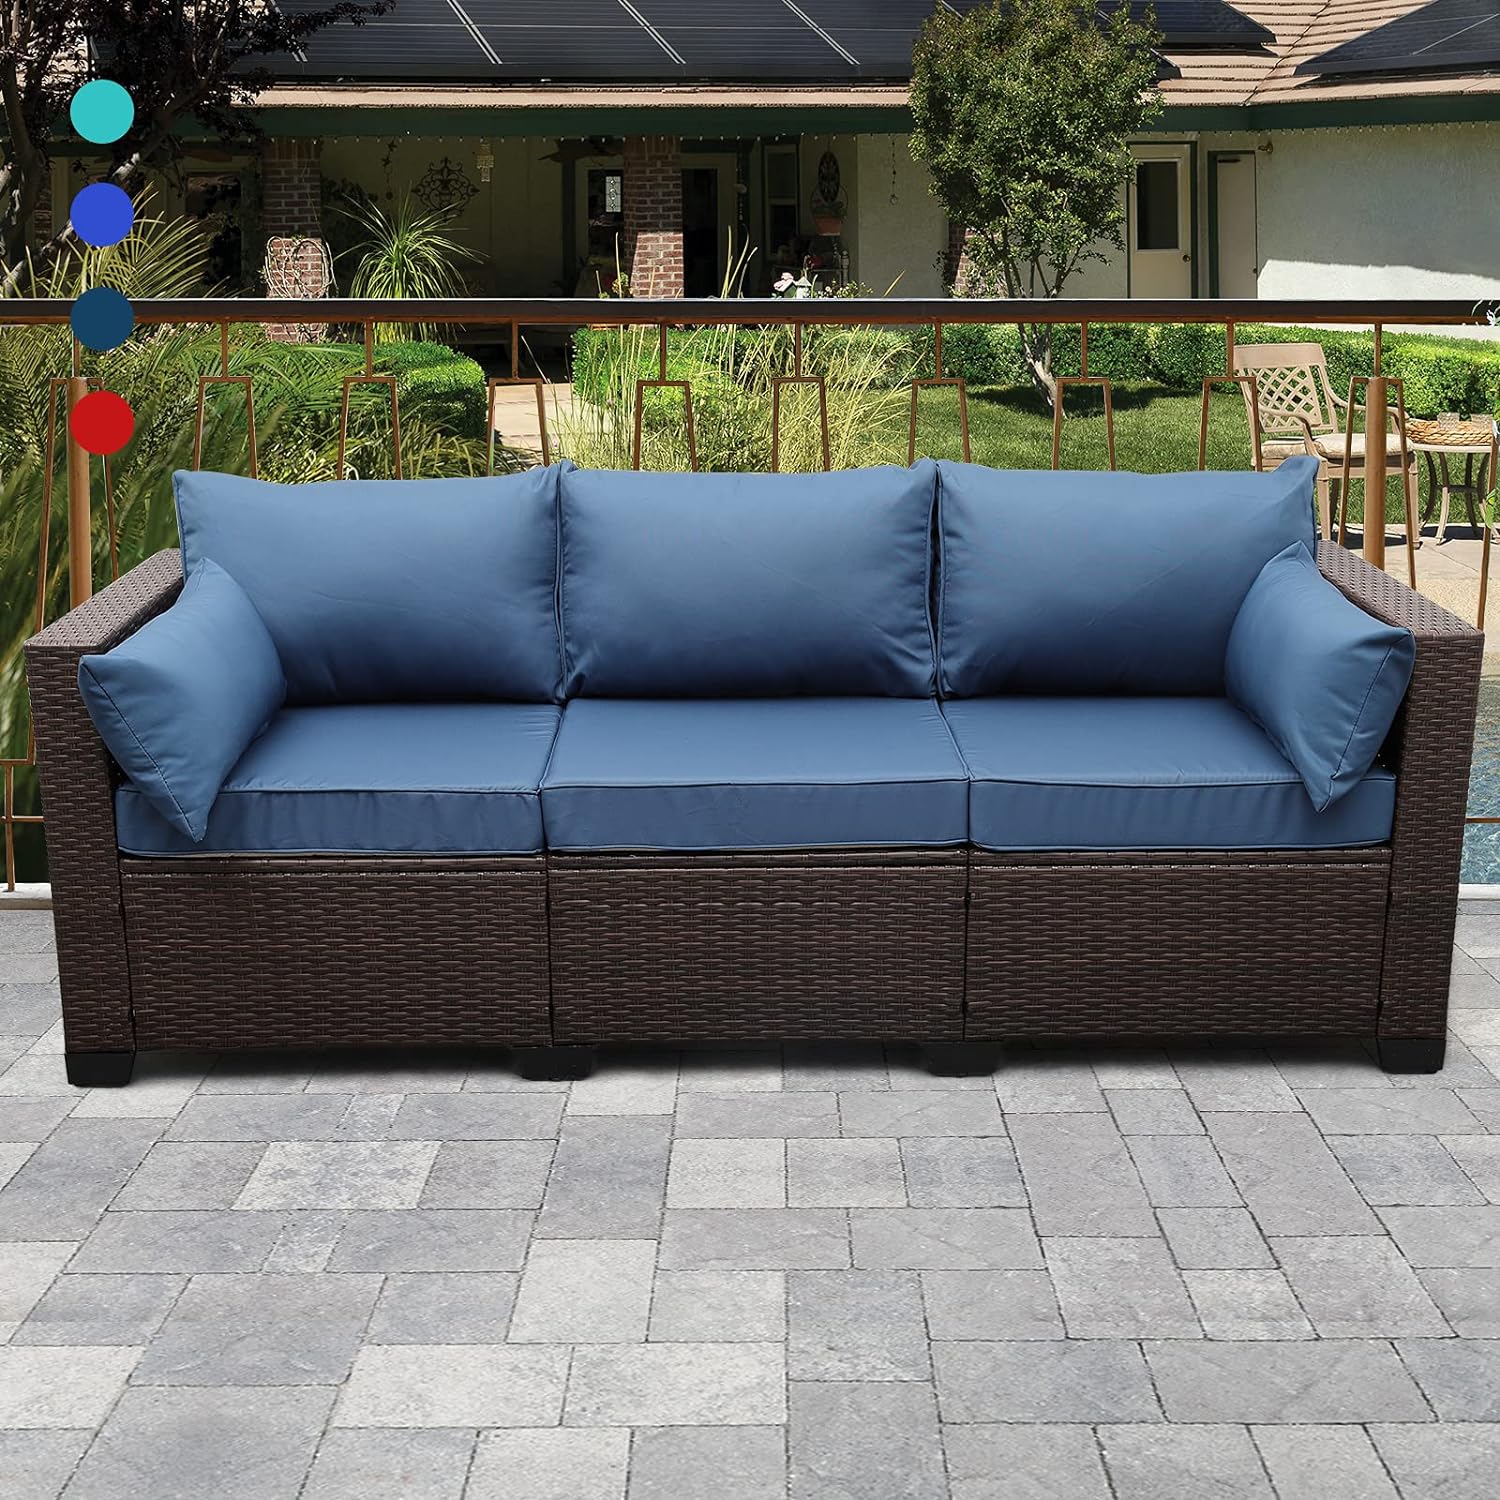 Rattaner 3-Seat Patio Wicker Sofa, Outdoor Rattan Couch Furniture Steel Frame with Furniture Cover and Deep Seat High Back, Blue Anti-Slip Cushion.